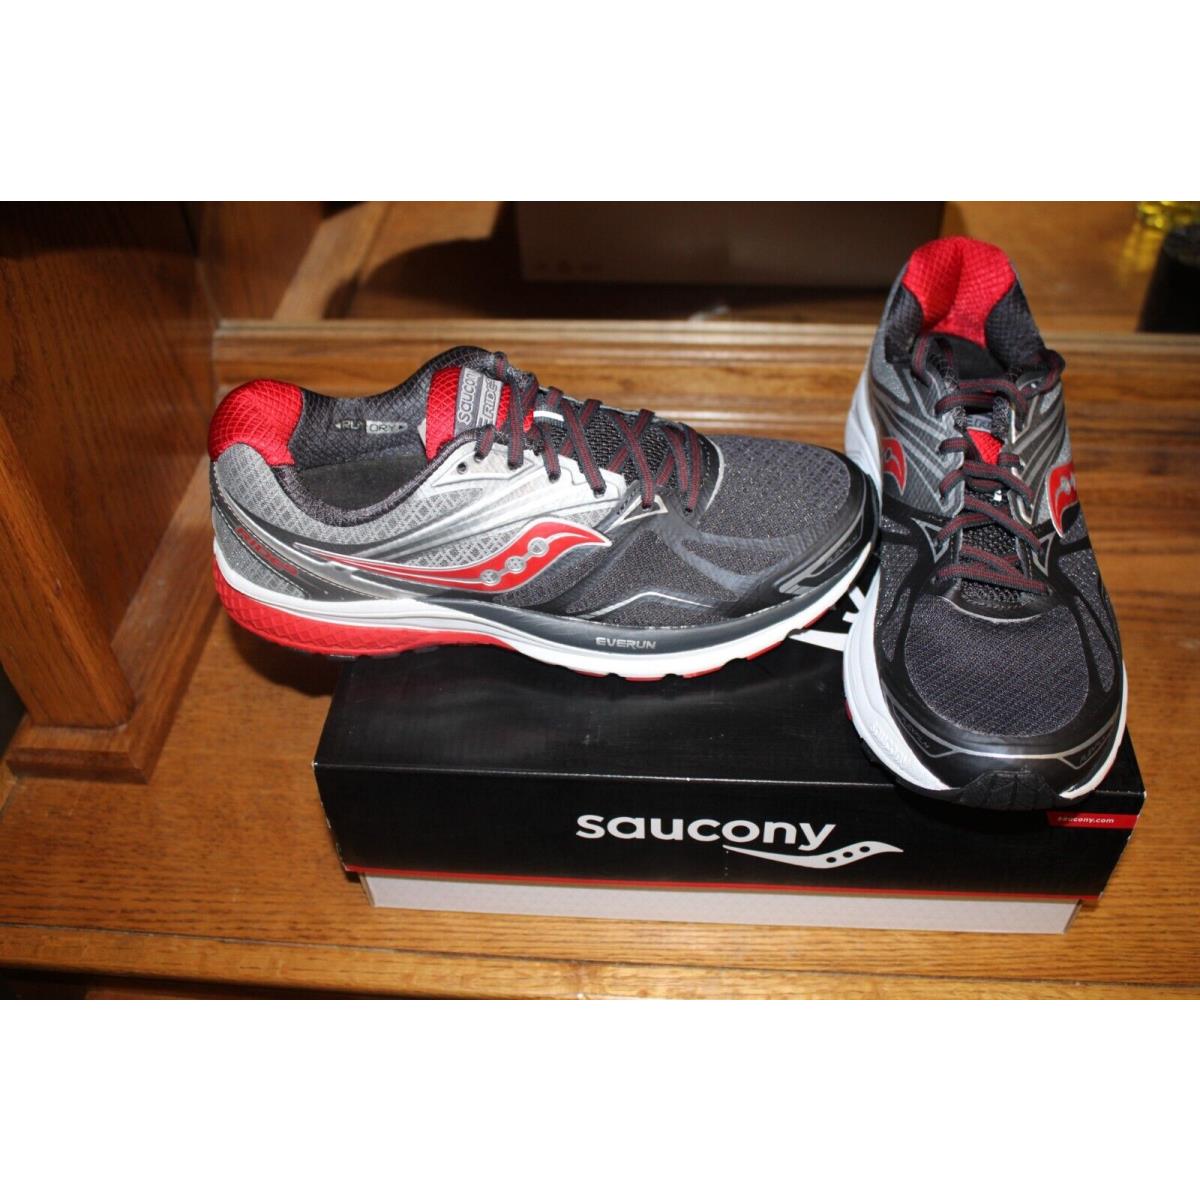 Saucony Ride 9 Running Shoes S201318-1 Mens Size 8 Gray/red